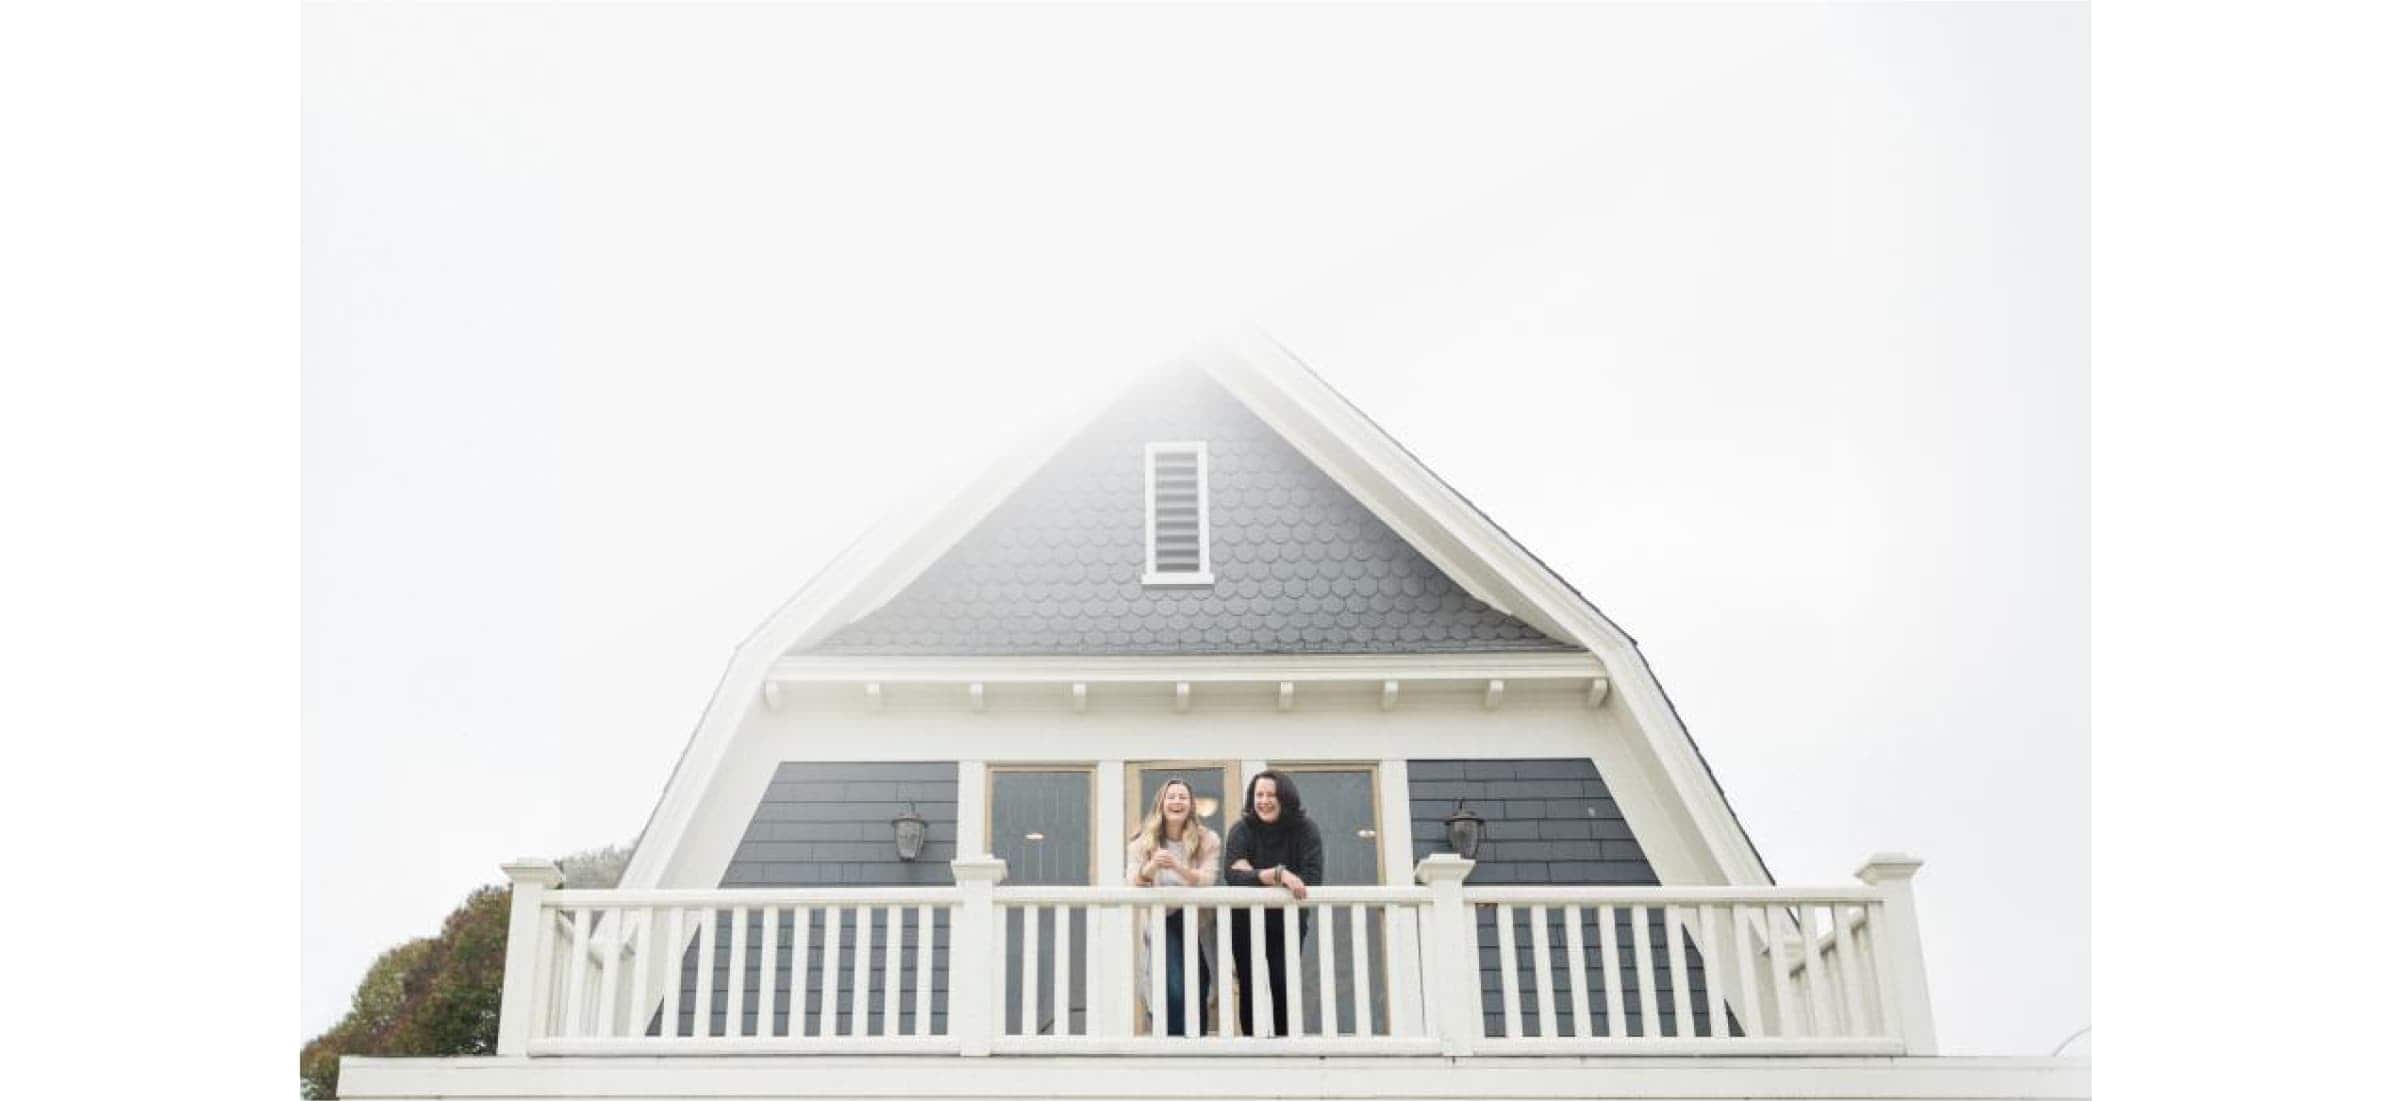 Nicole and Anne standing on a balcony at the top of a house laughing.